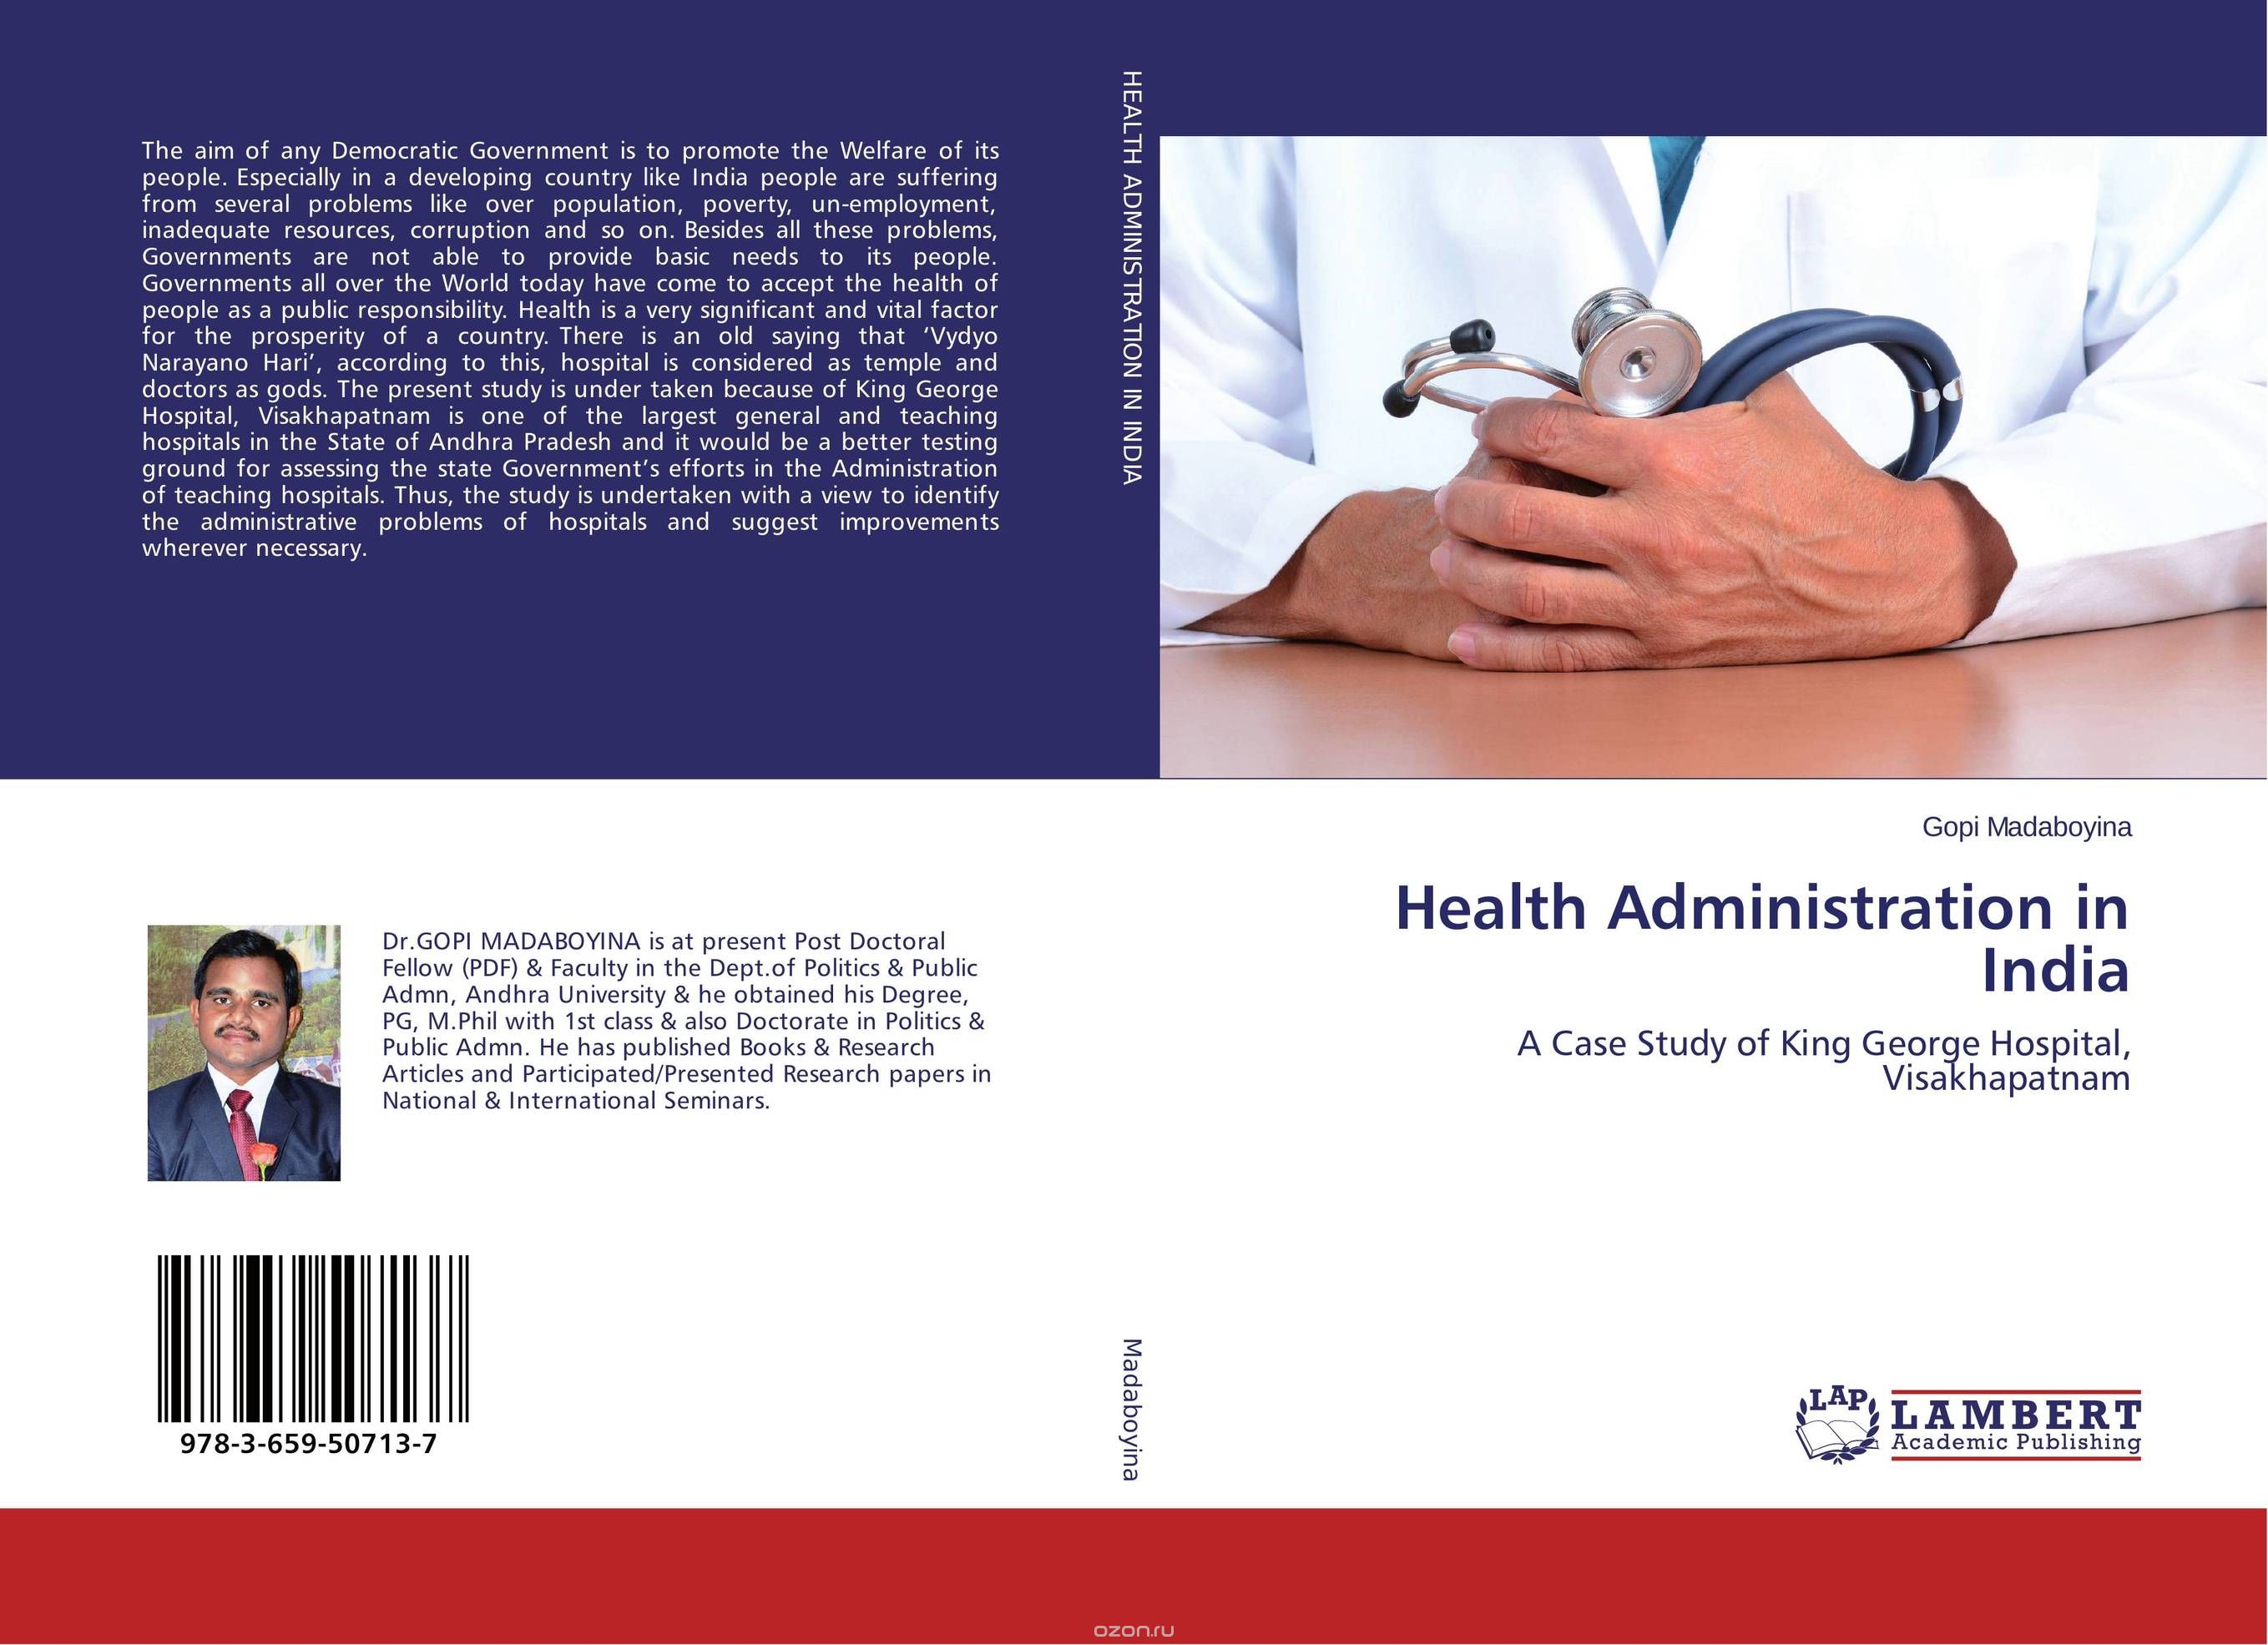 Health Administration in India